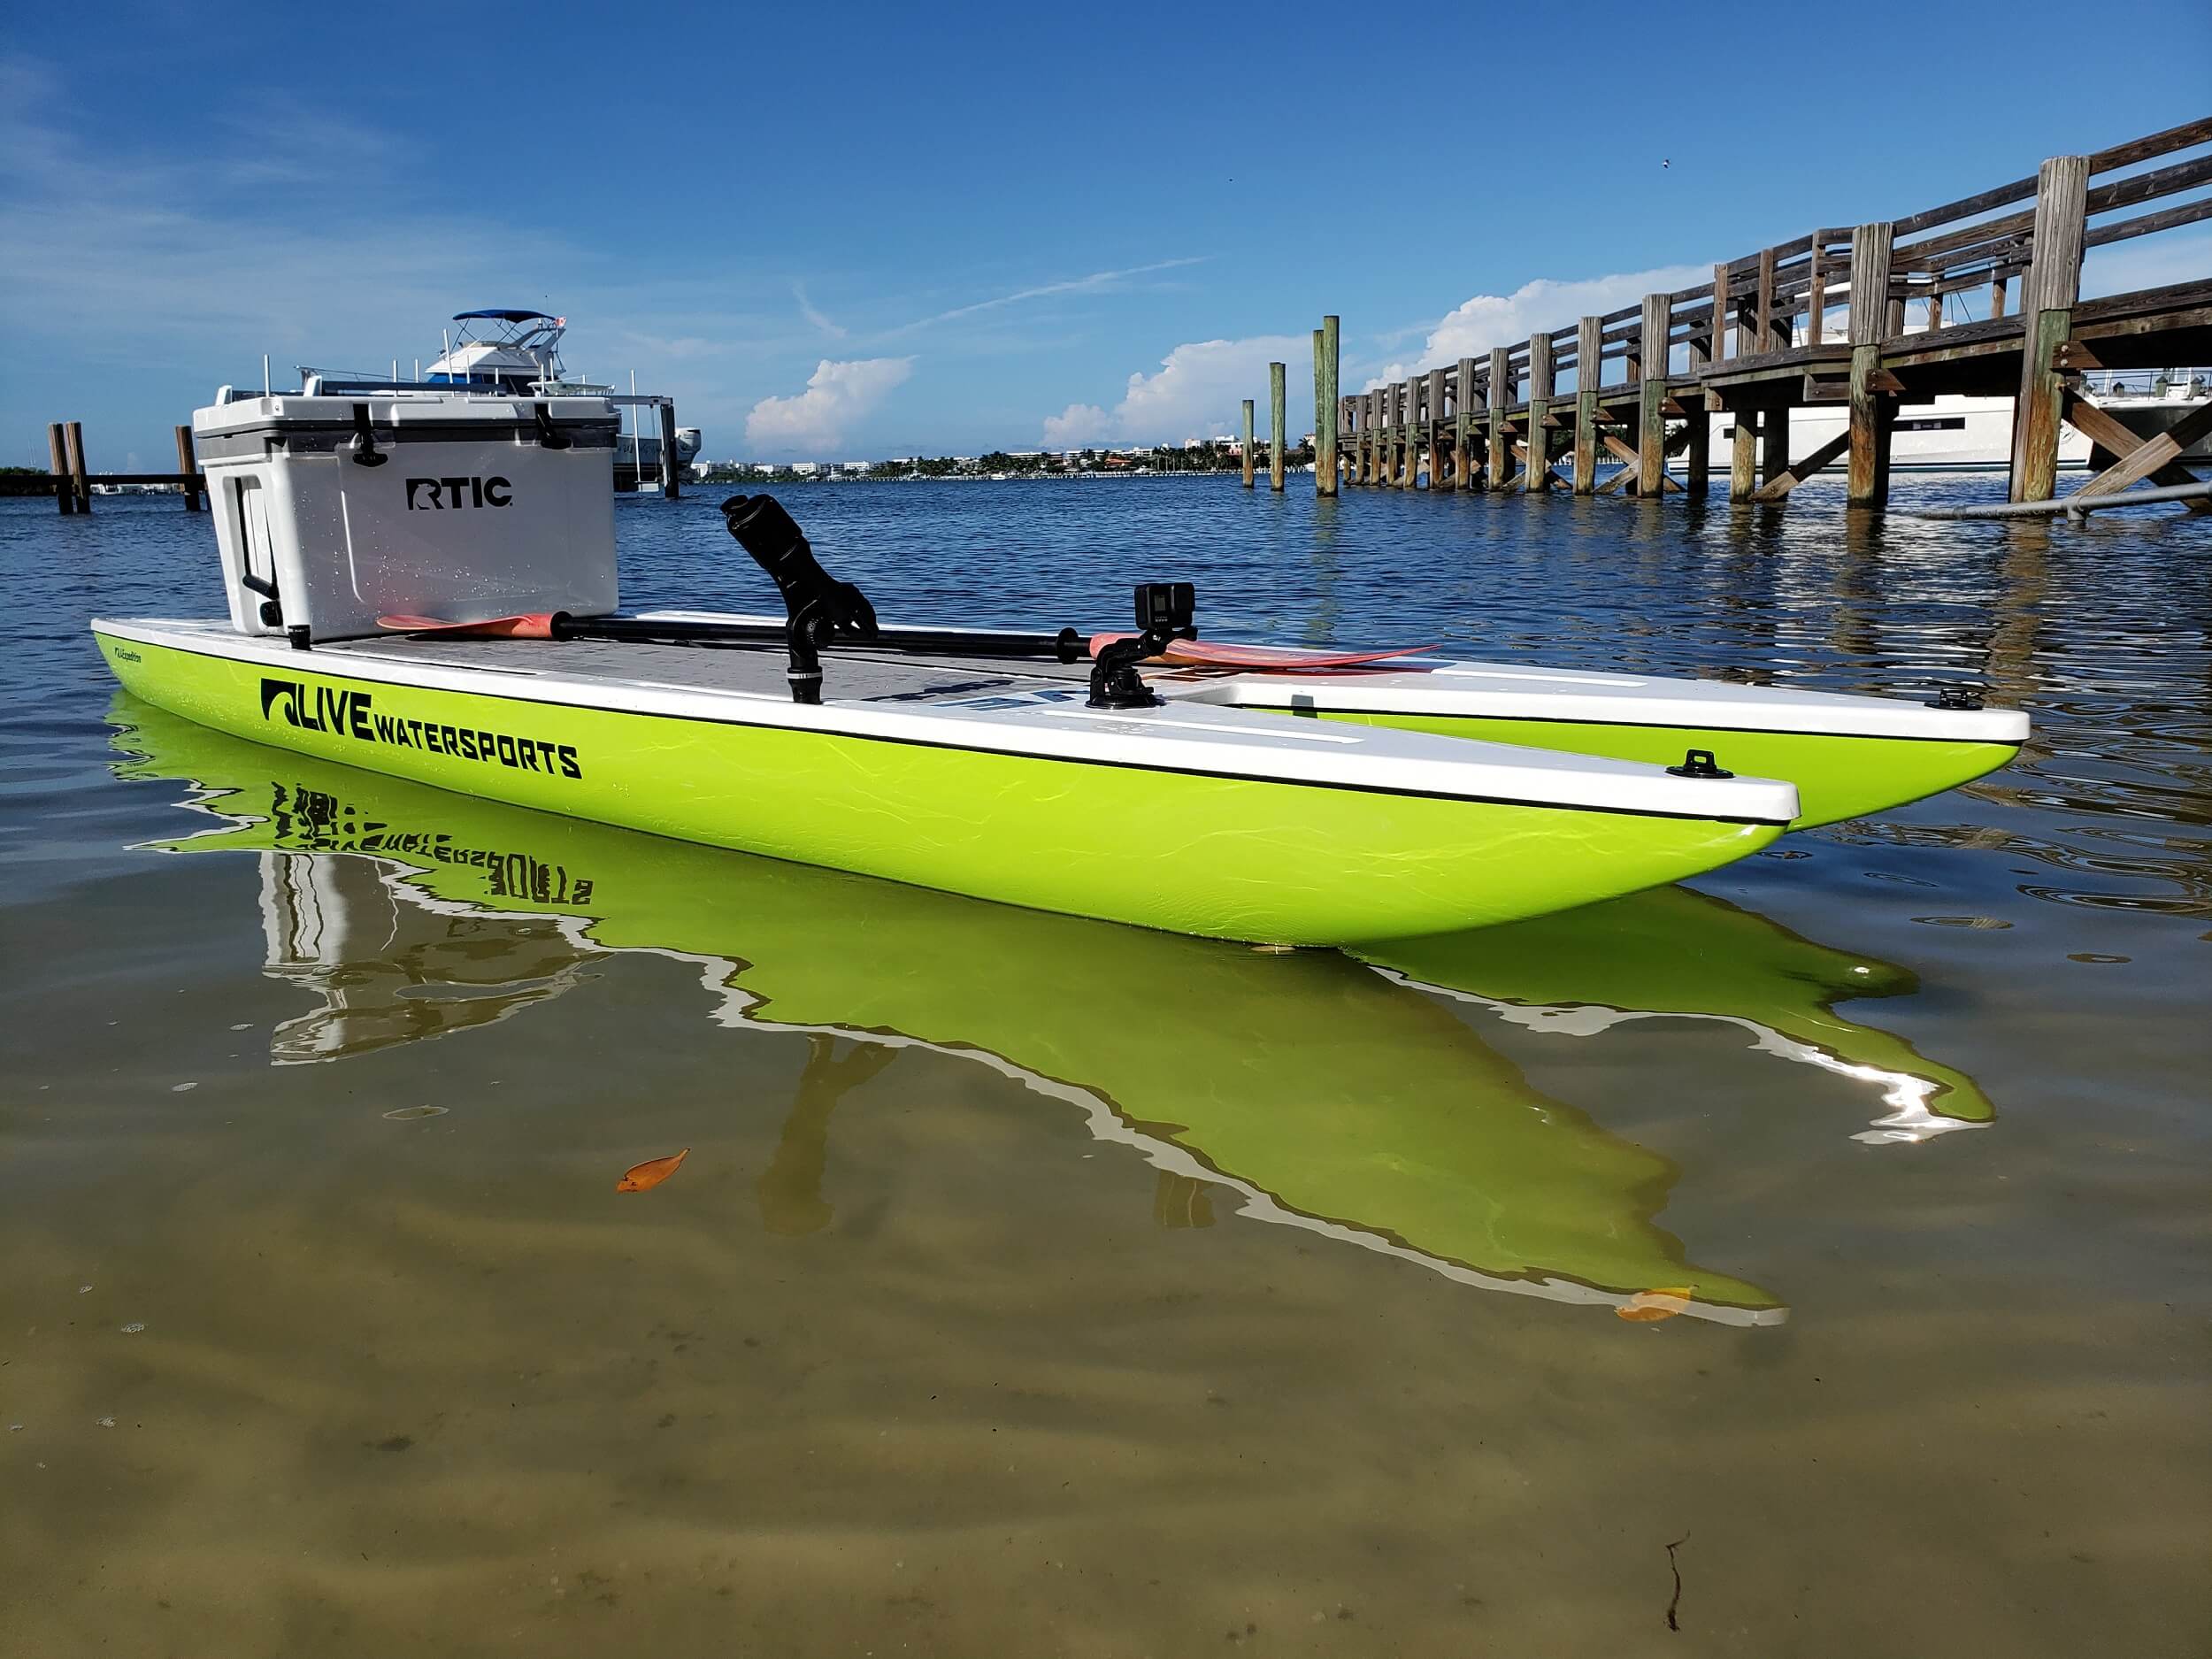 https://coralheads.com/wp-content/uploads/2020/10/L4-Expedition-by-Live-Watersports-The-Ultimate-Fishing-Paddle-Board.jpg